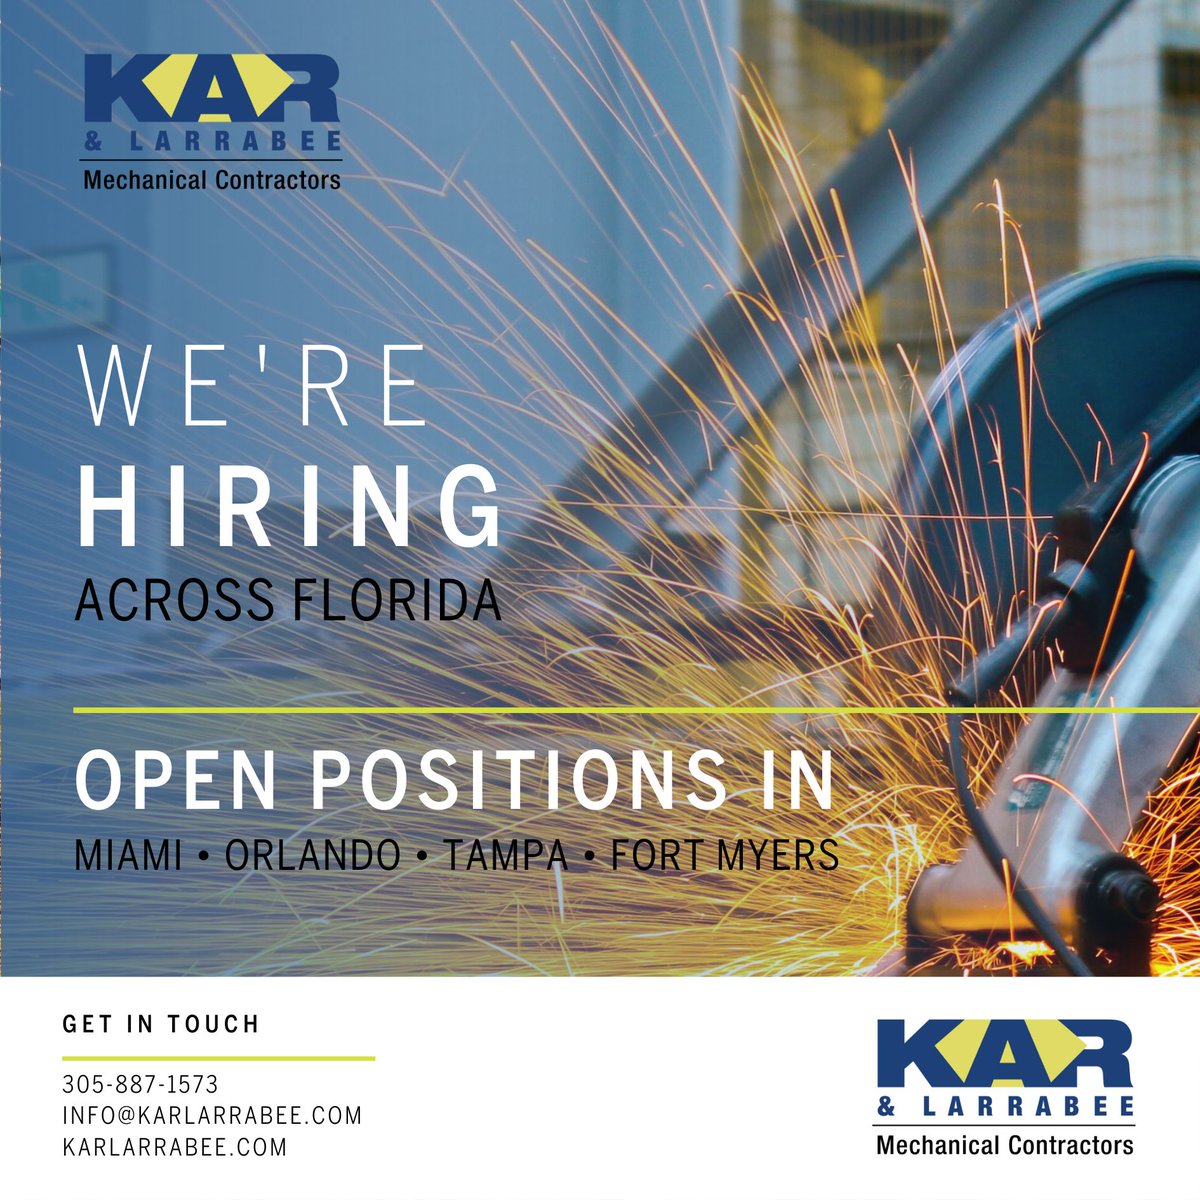 Advance your career in the mechanical contracting field. We are hiring across Florida for Senior Estimators, HVAC Technicians, Chiller Technicians, Welders and Pipefitters. To apply, send your resume to careers@karlarrabee.com 

#werehiring #mechanicalcontractors